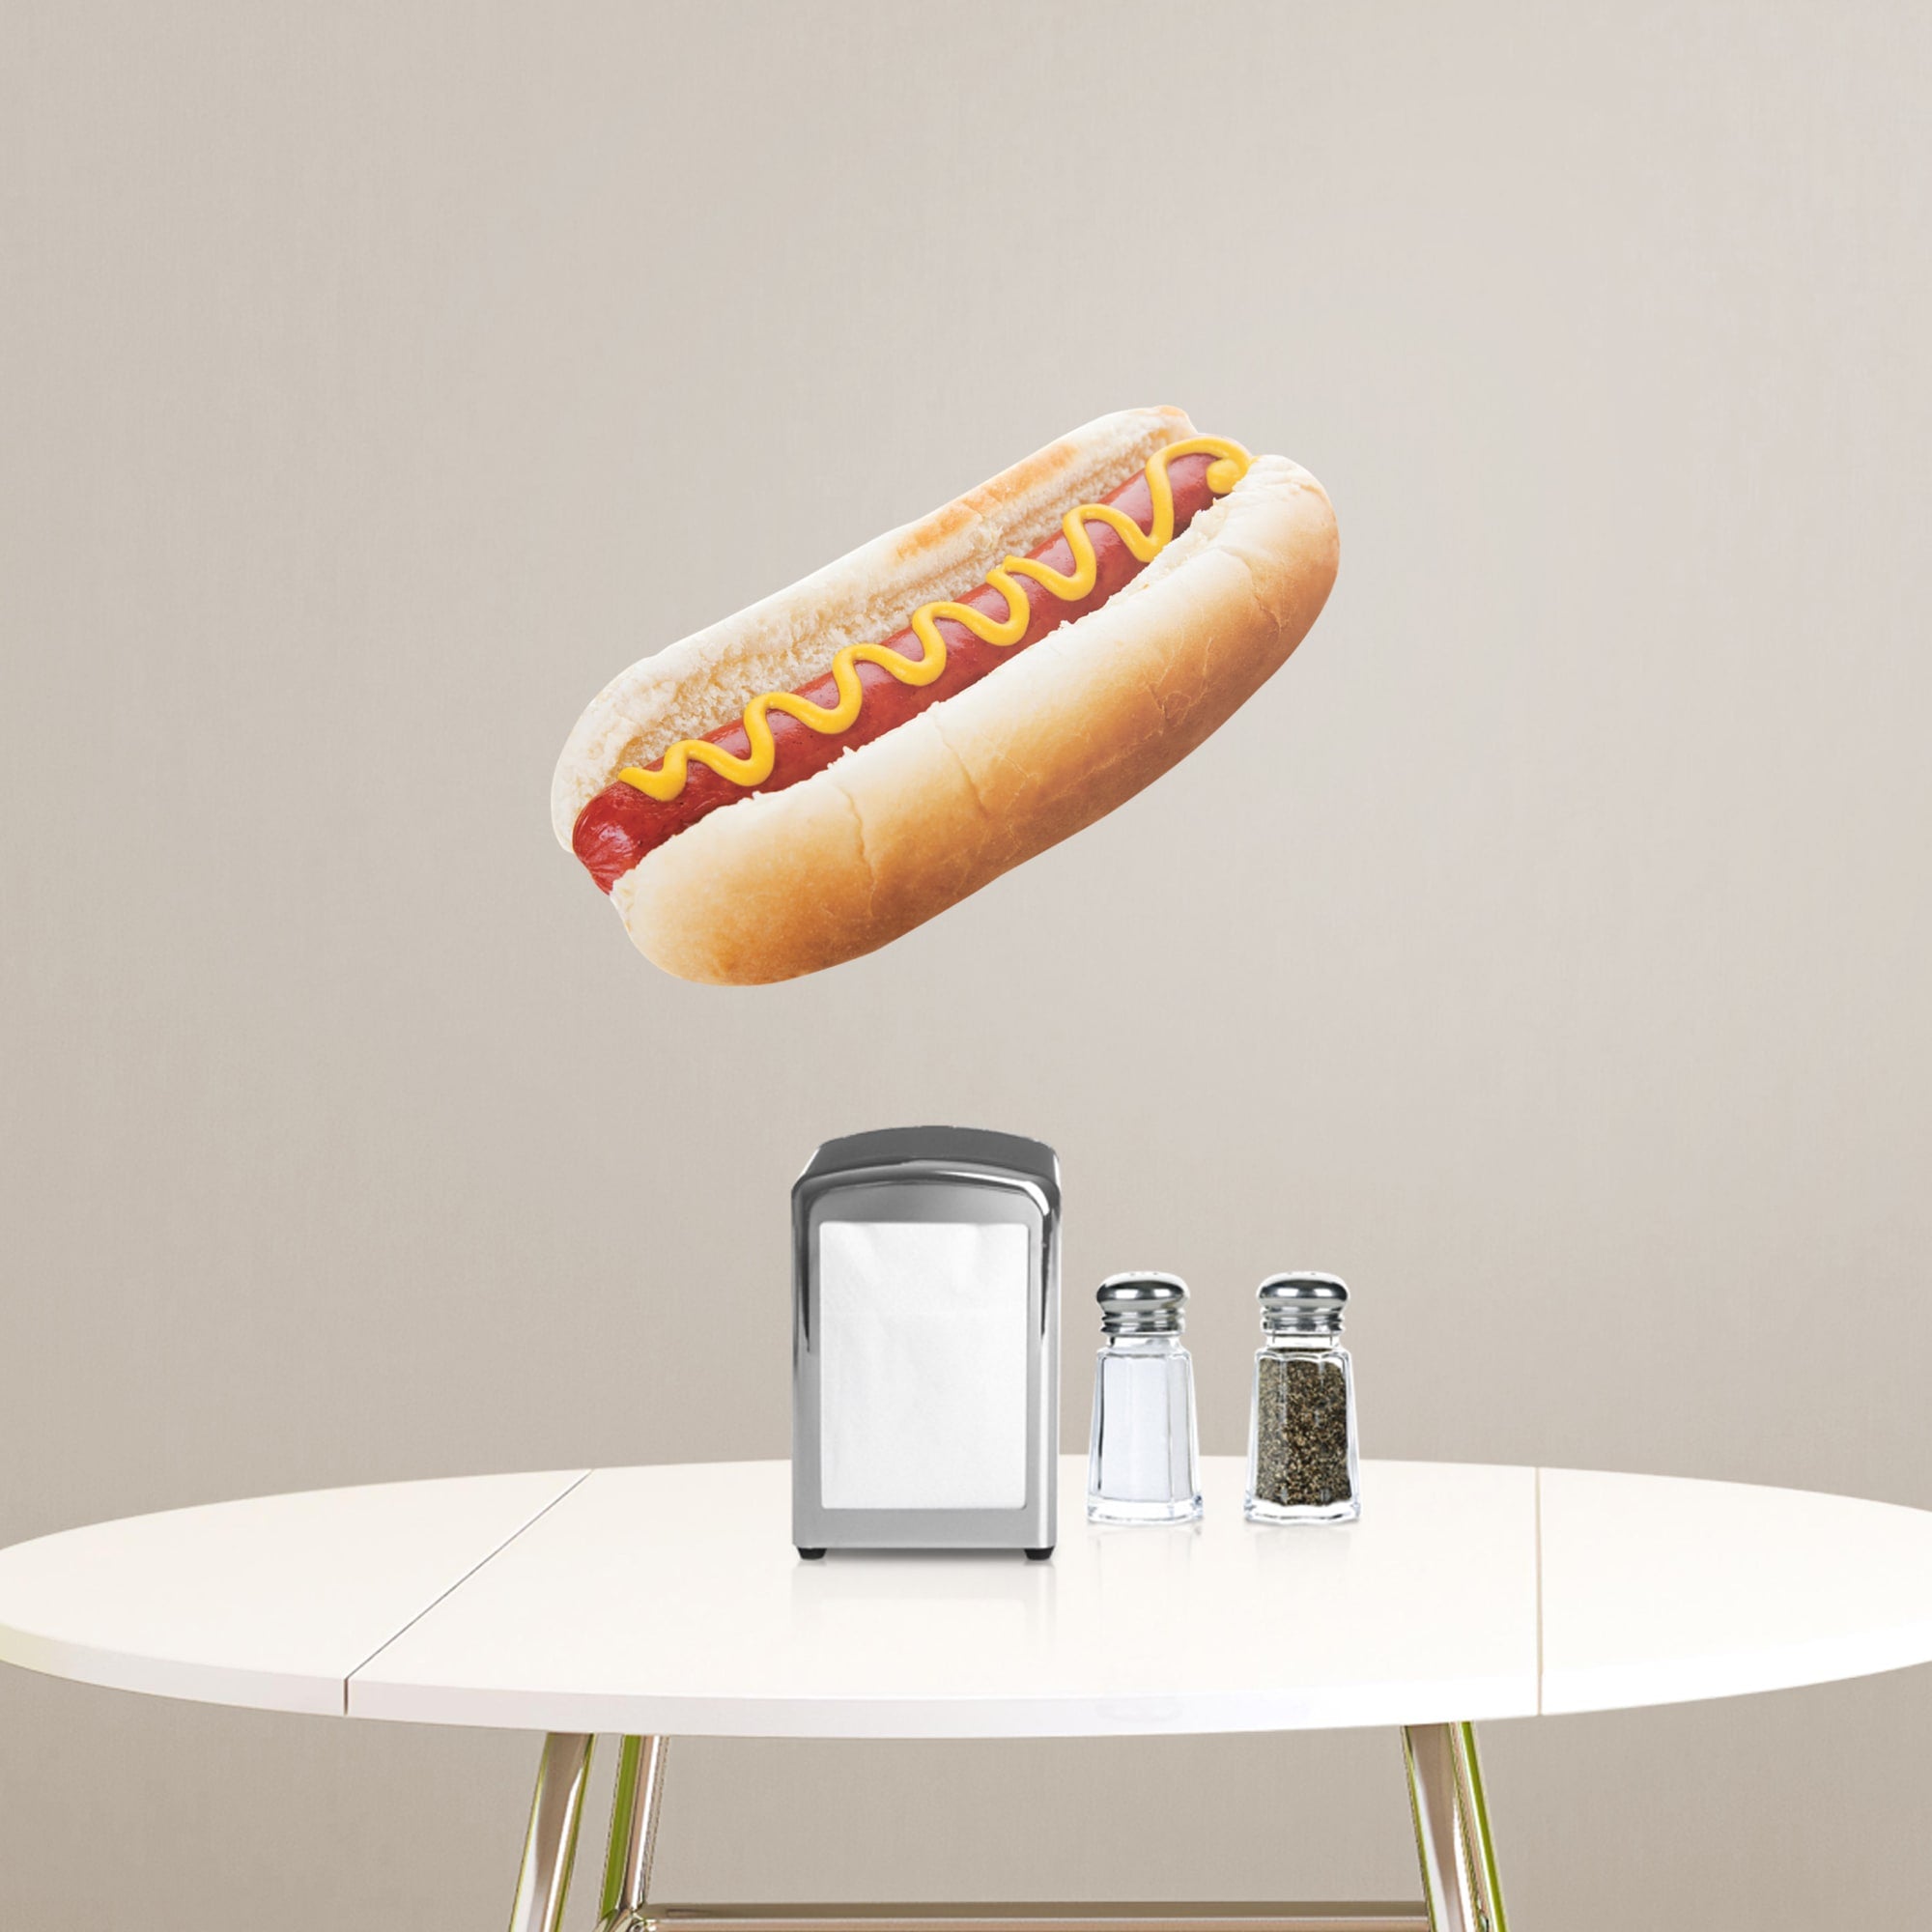 Hot Dog - Removable Vinyl Decal Large by Fathead